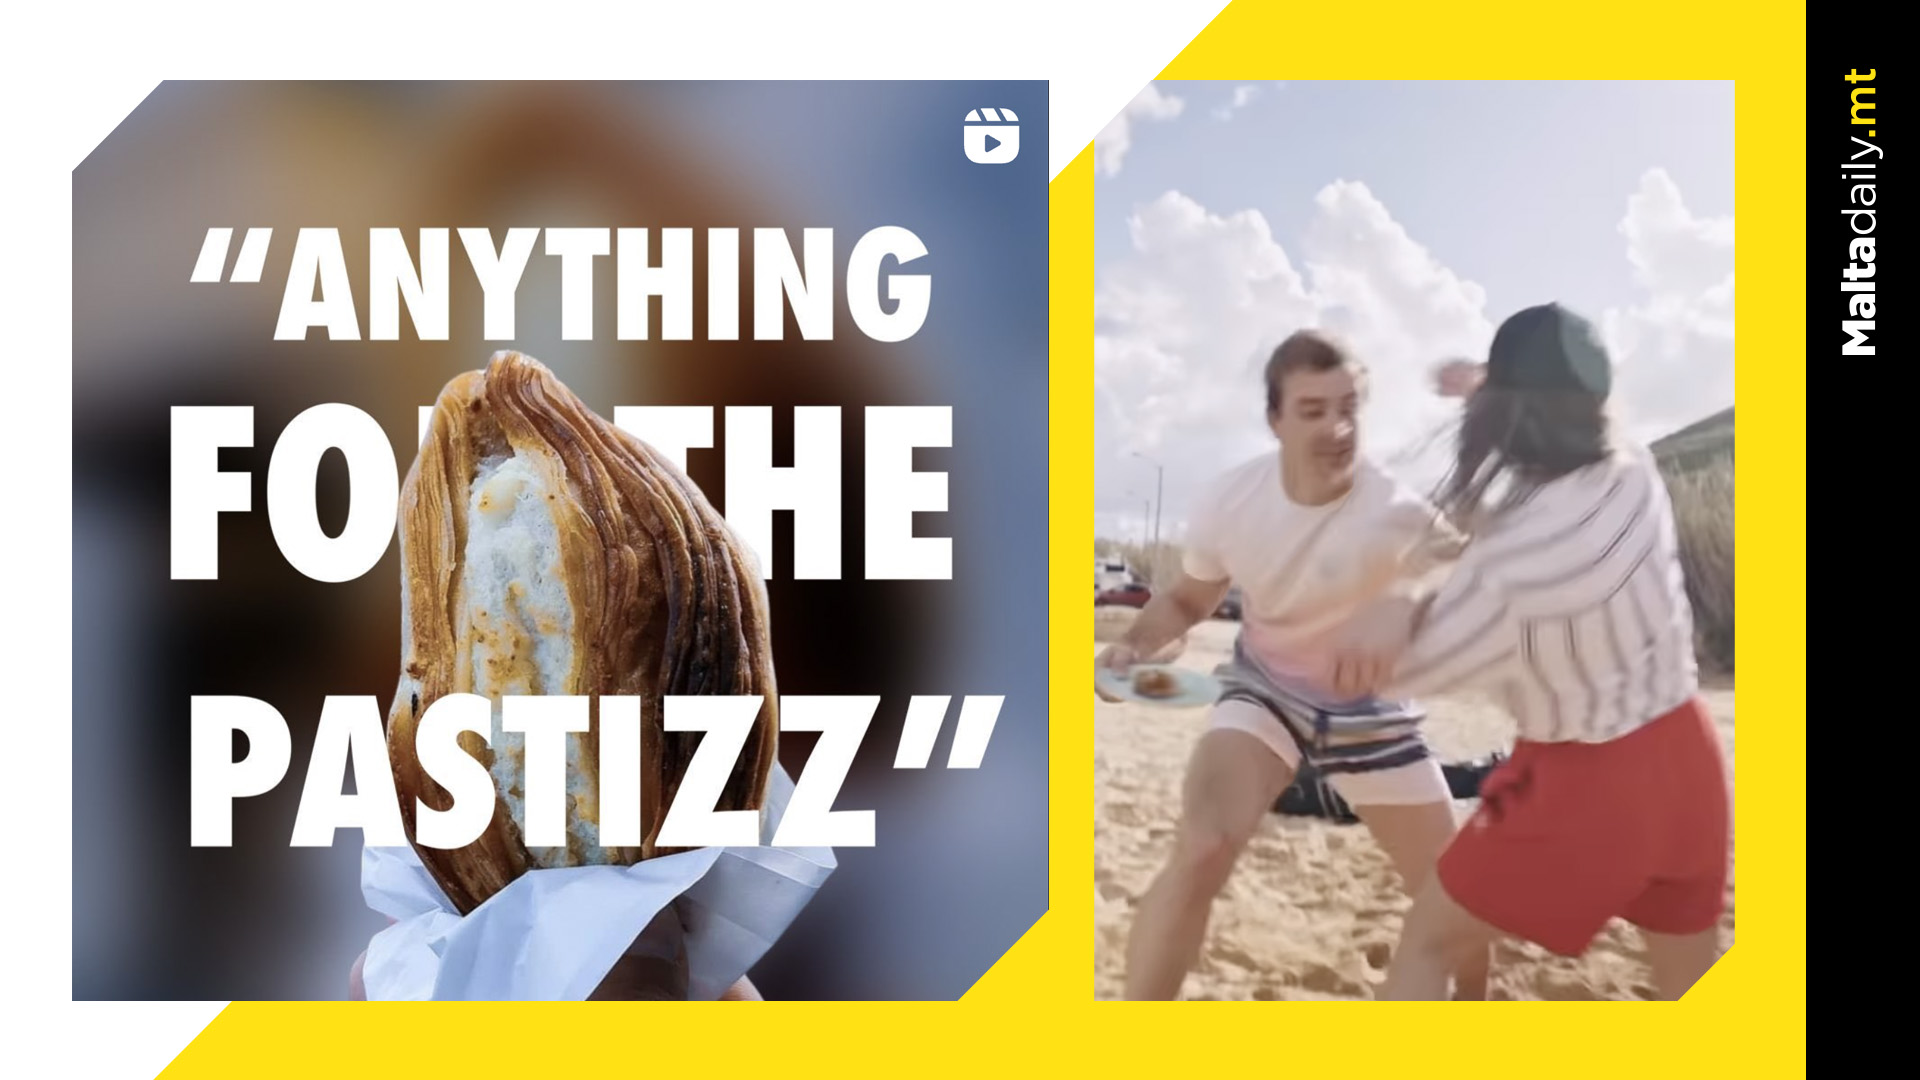 Maltese stunt performers join forces to create hilarious reel “Anything for the Pastizz”